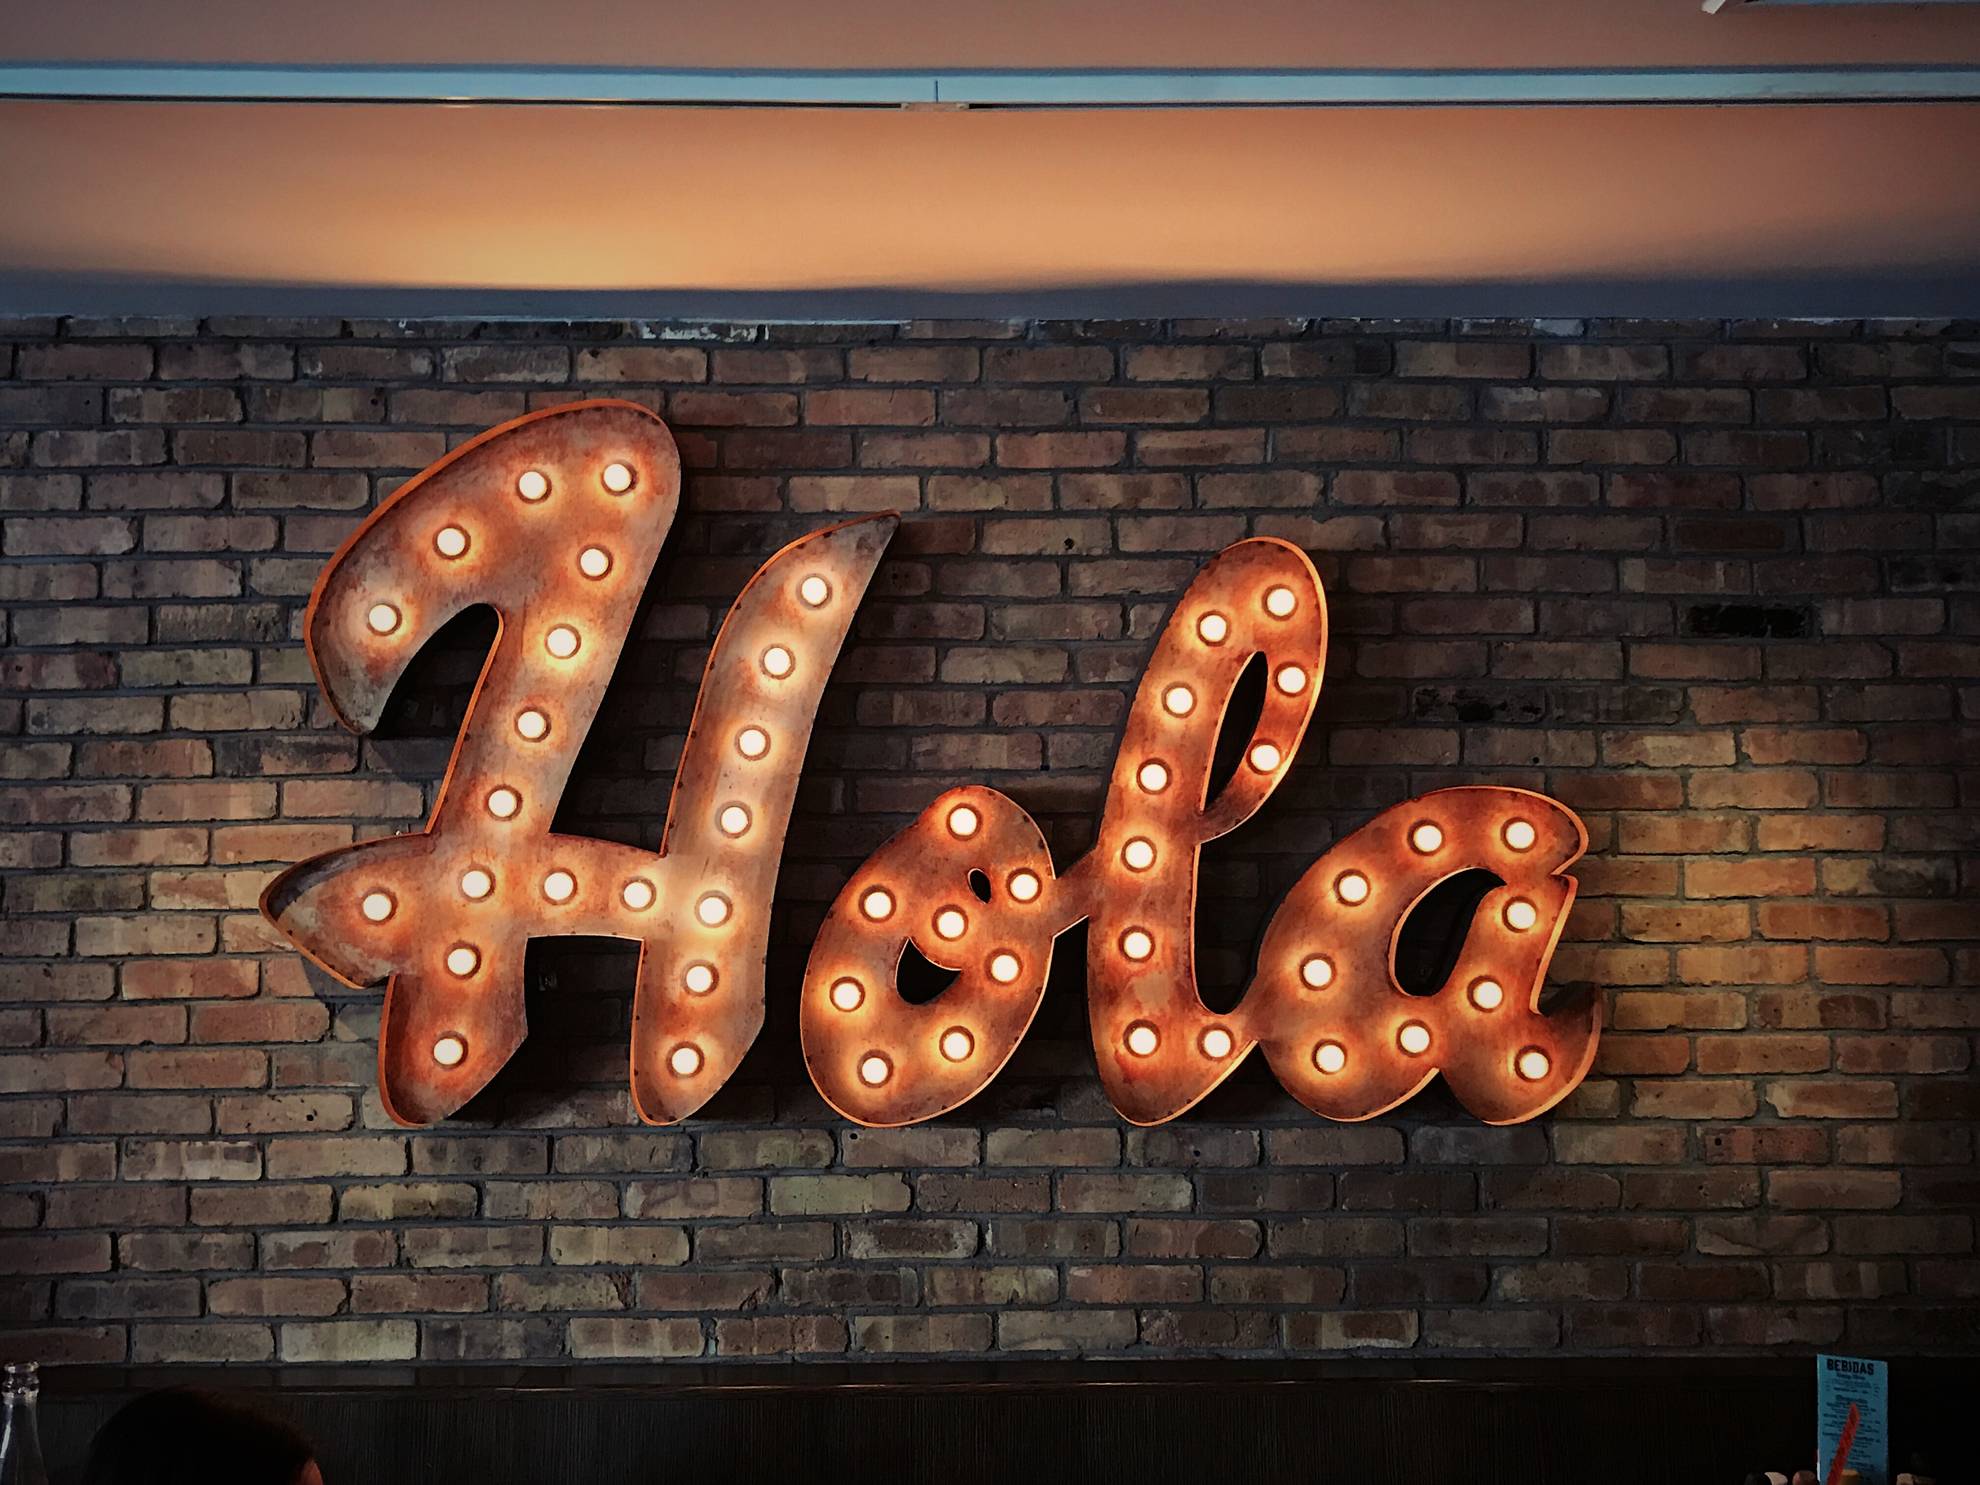 Neon "hola" sign